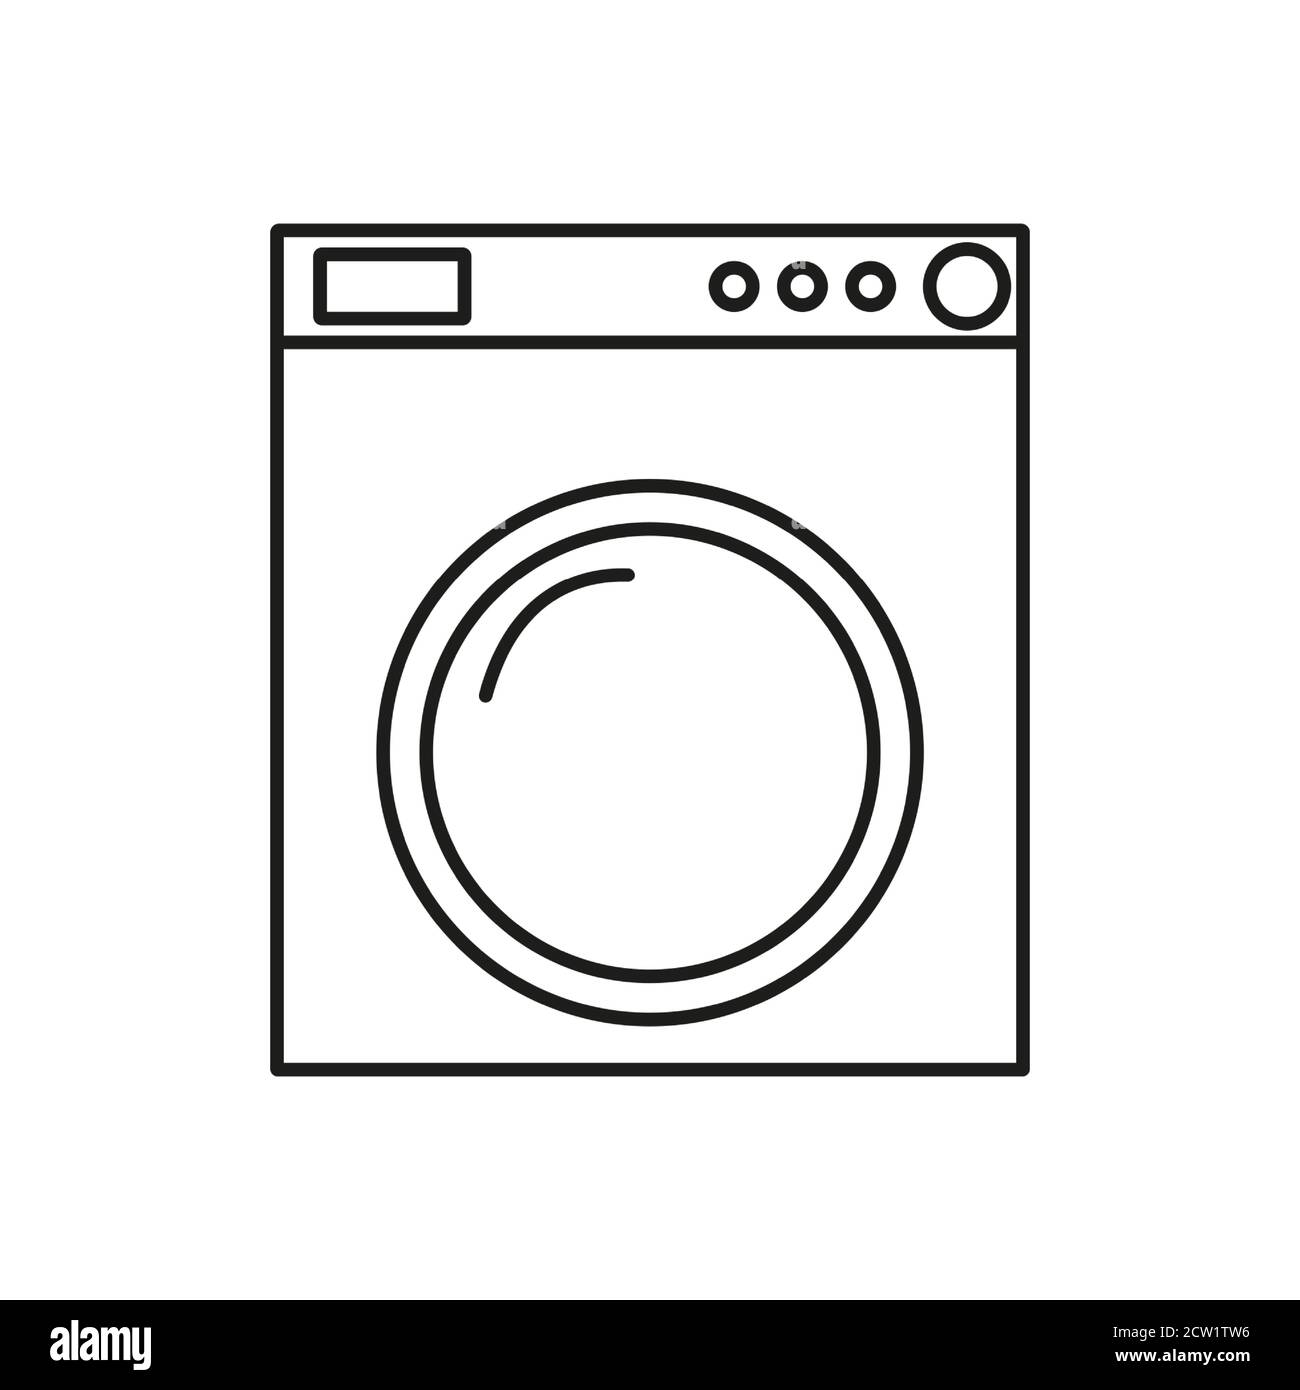 Washing machine Icon Kitchen appliances, icons, outline, black. Home electrical appliances. black flat icons with a black outline. Stock Vector